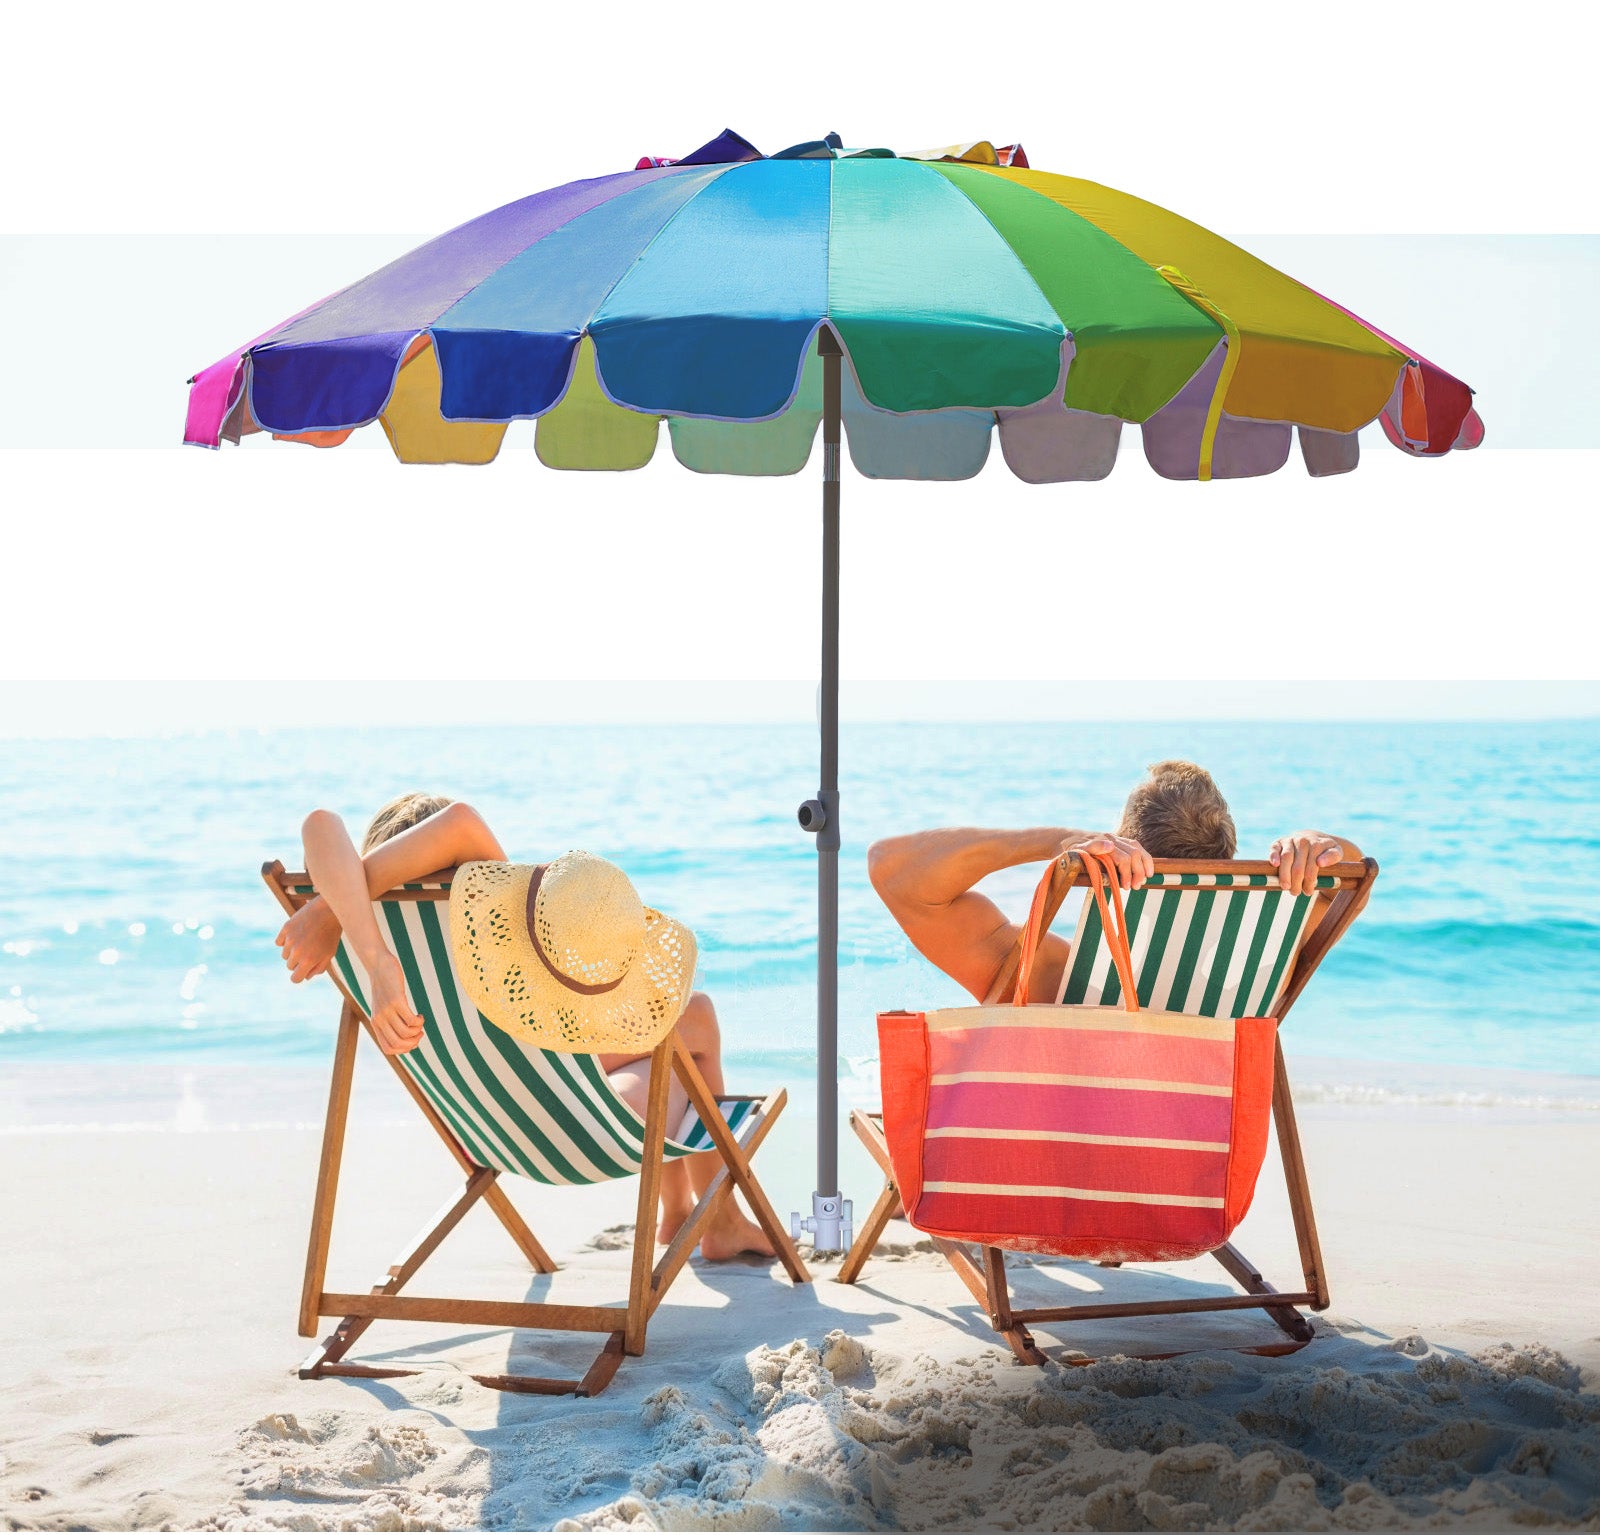 What is the best fabric for a beach umbrella?